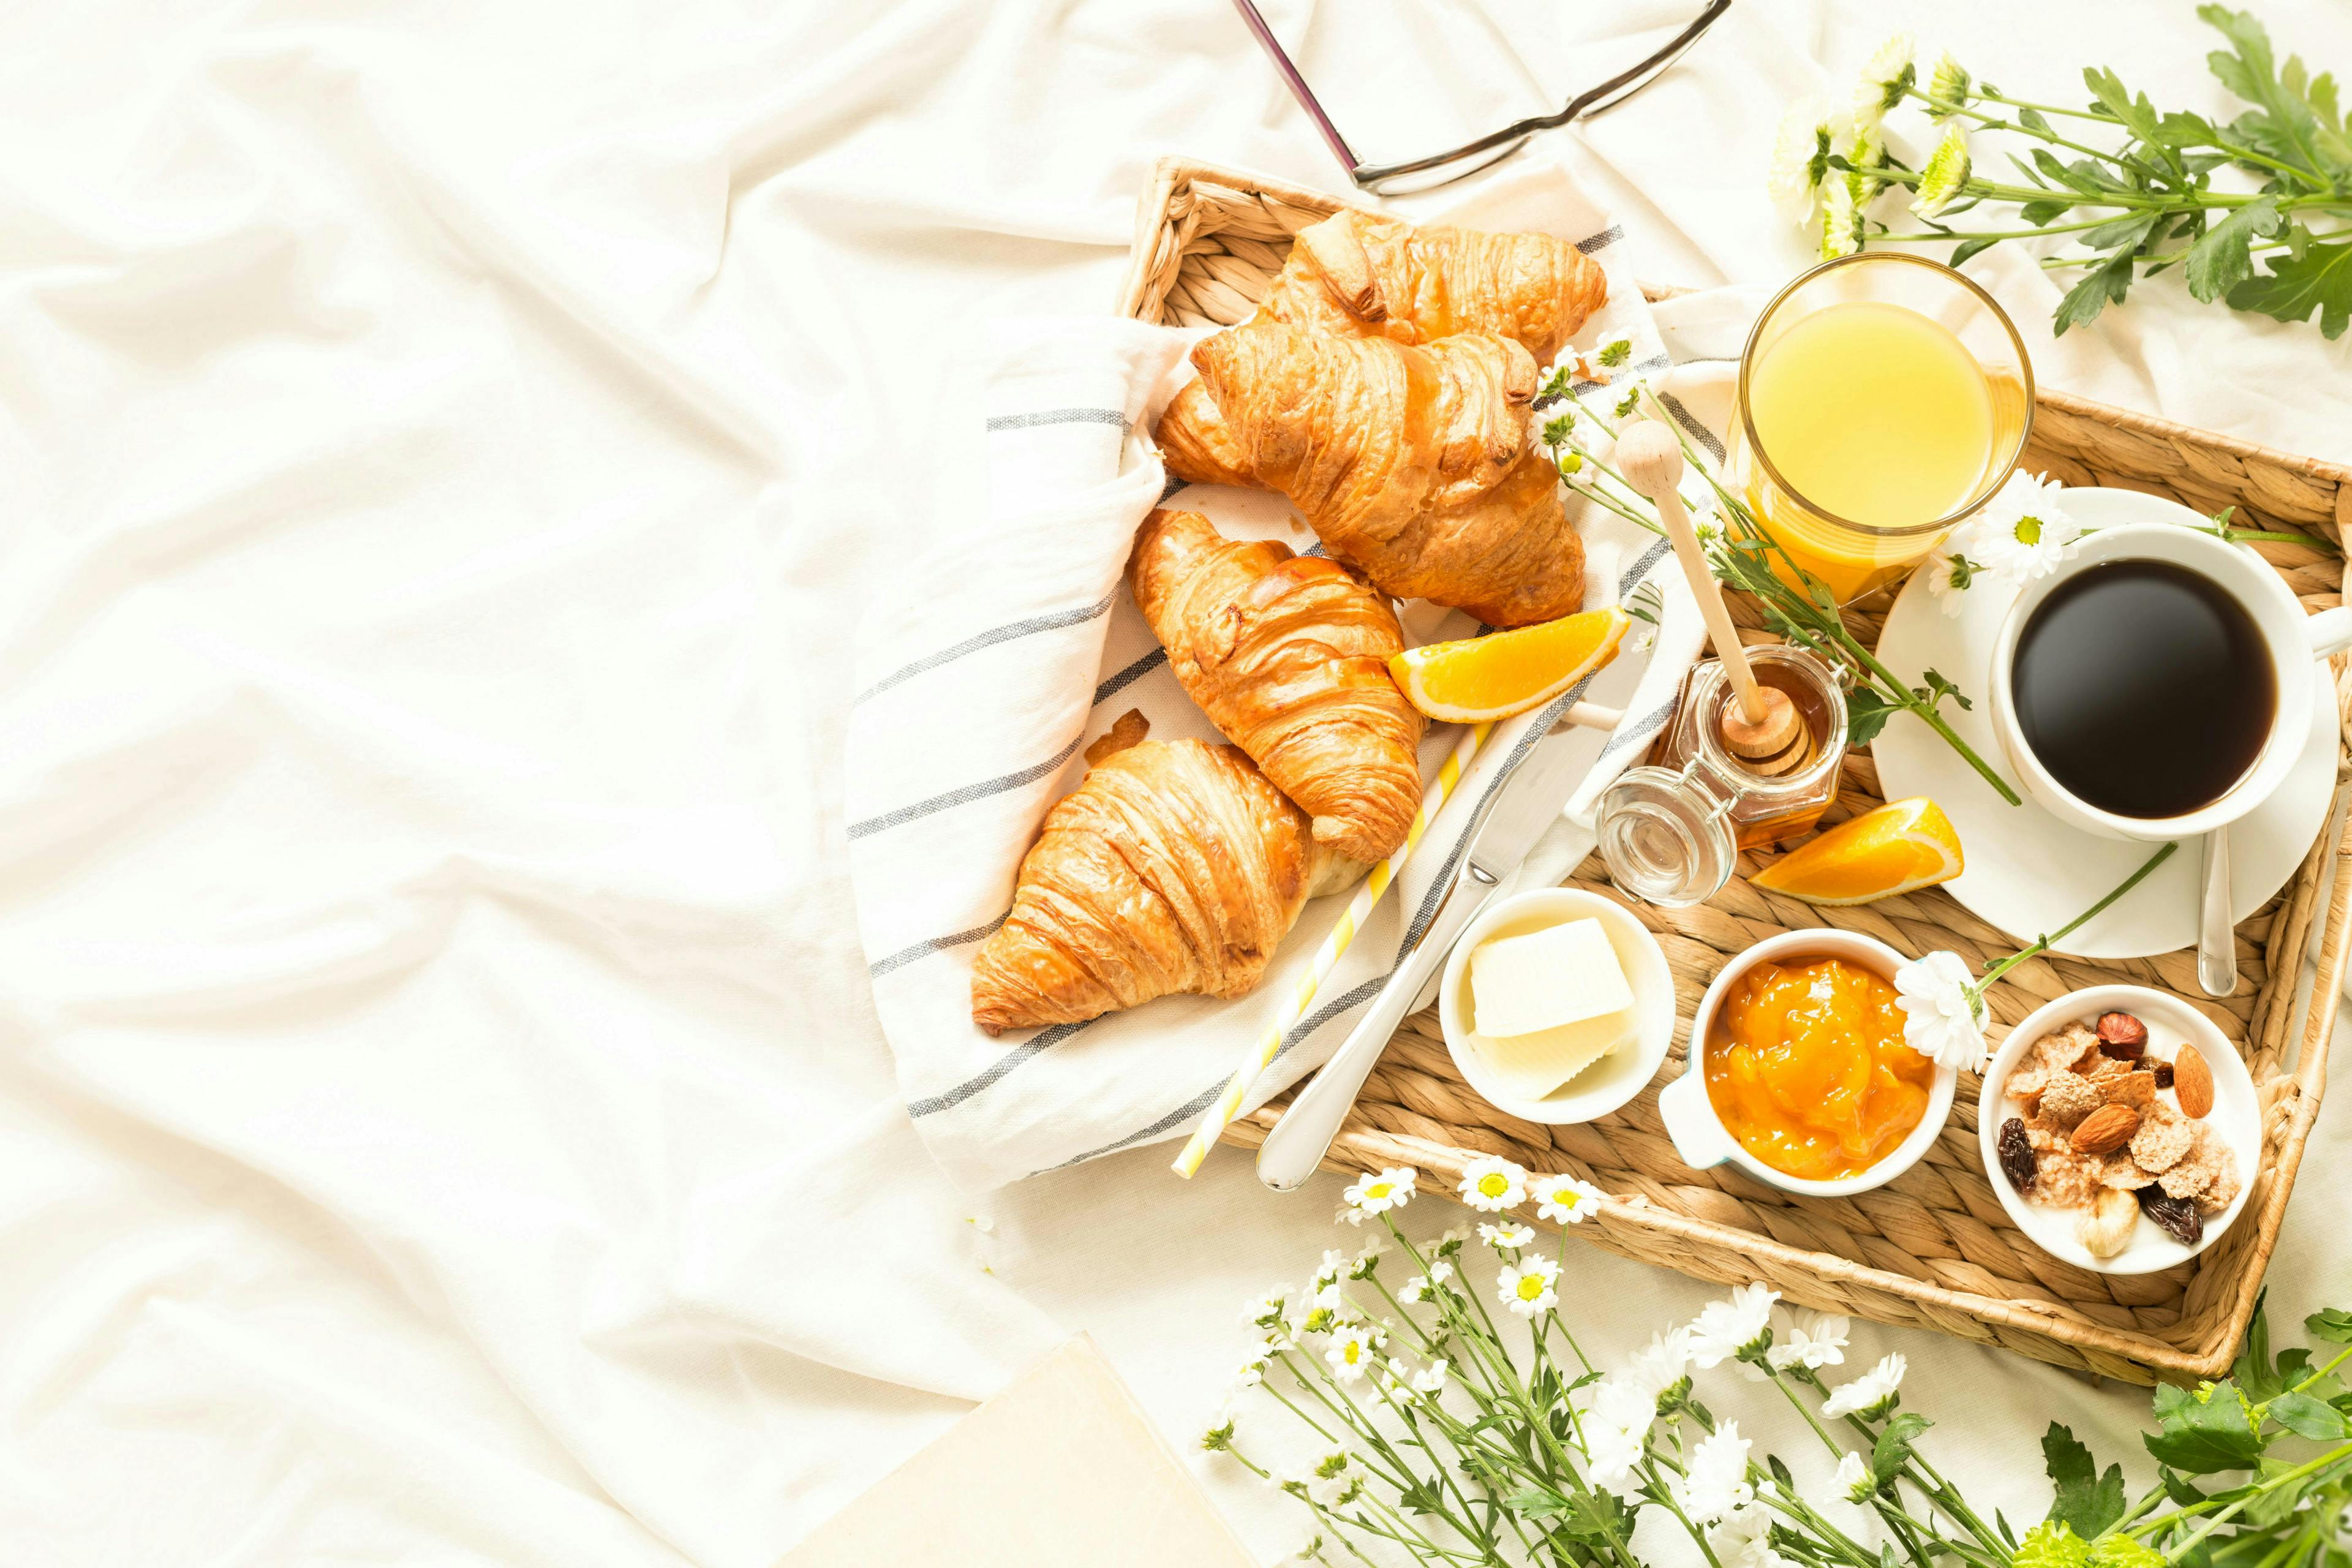 breakfast continental bed bedroom morning food eat drink beverage delicious tray meal coffee croissant orange juice flowers sheets white hotel b&b bed and breakfast background text space home lifestyle romantic country countryside rural rustic summer spring weekend holiday vacation scenery pension guesthouse relaxation menu relax calm beautiful fruits french jam leisure top view from above flat lay